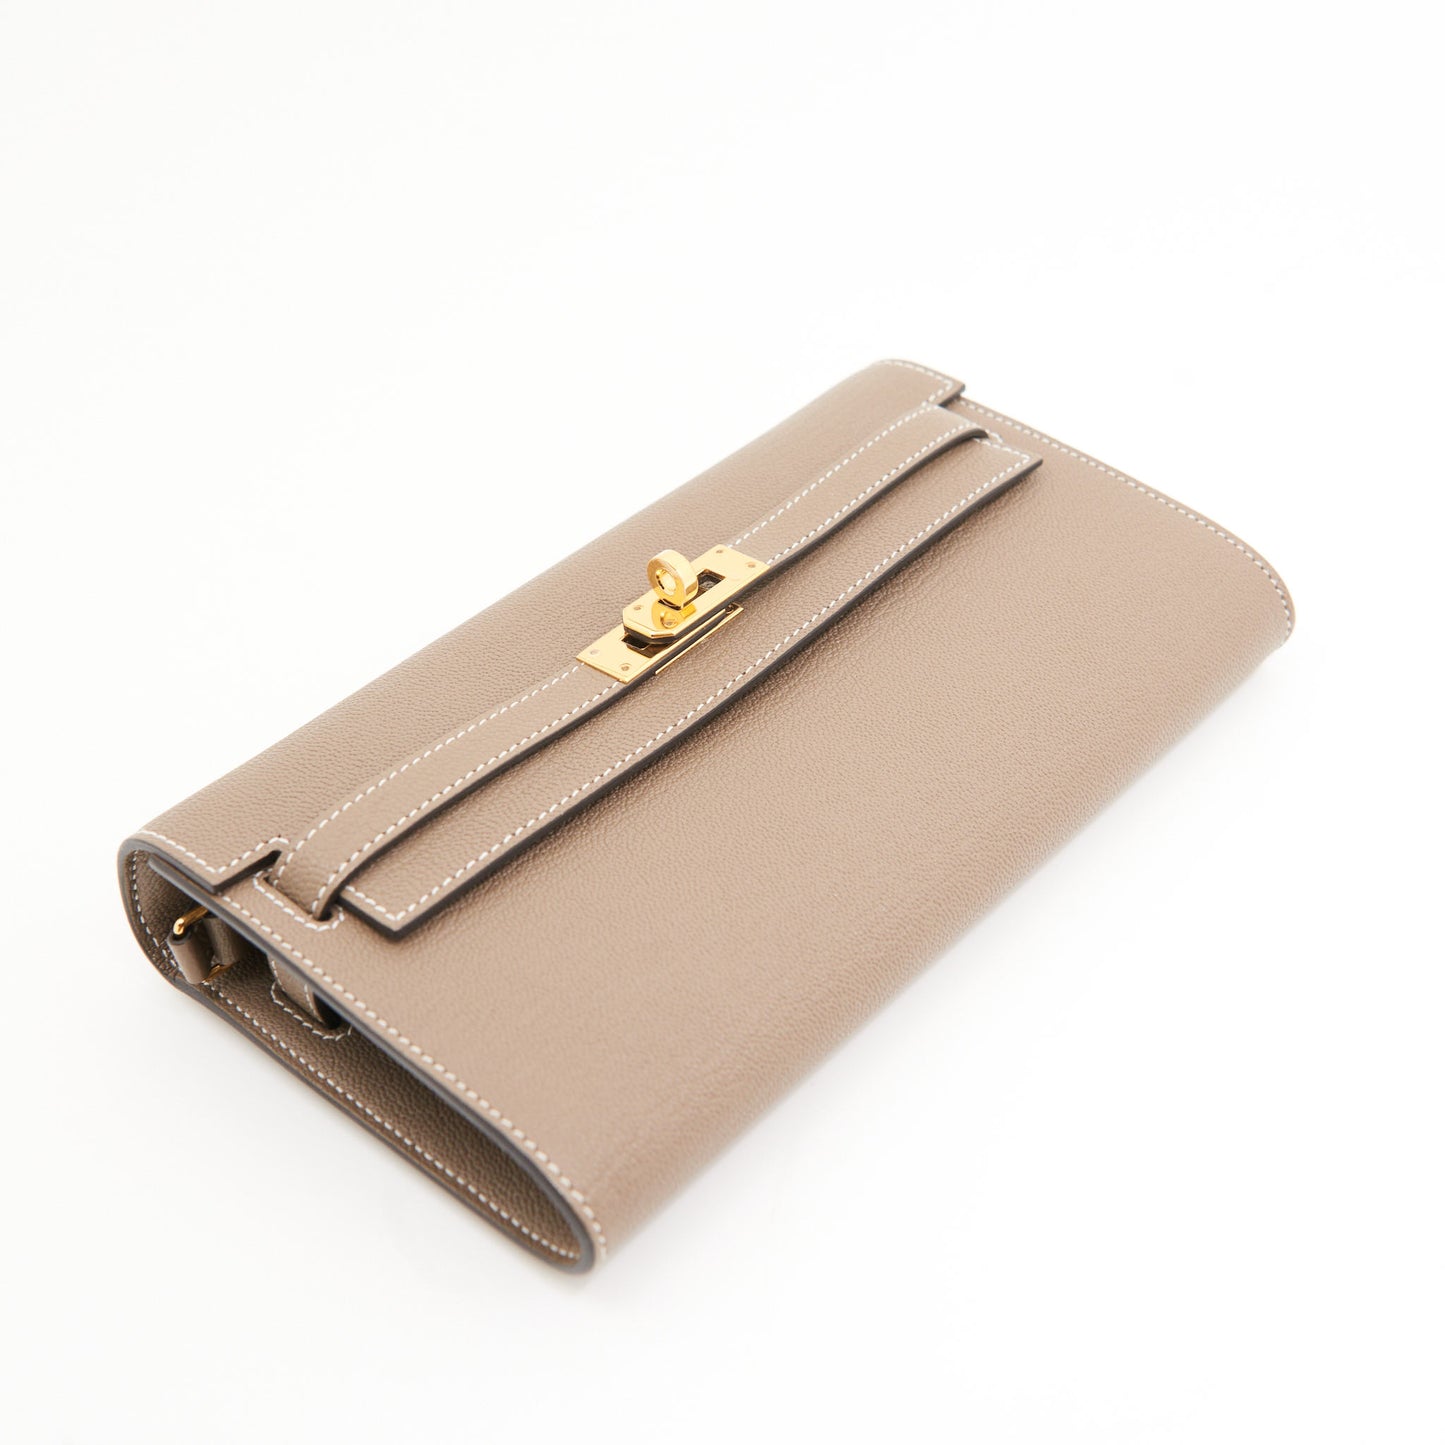 Hermes Togo Kelly to go Wallet in Etoupe GHW